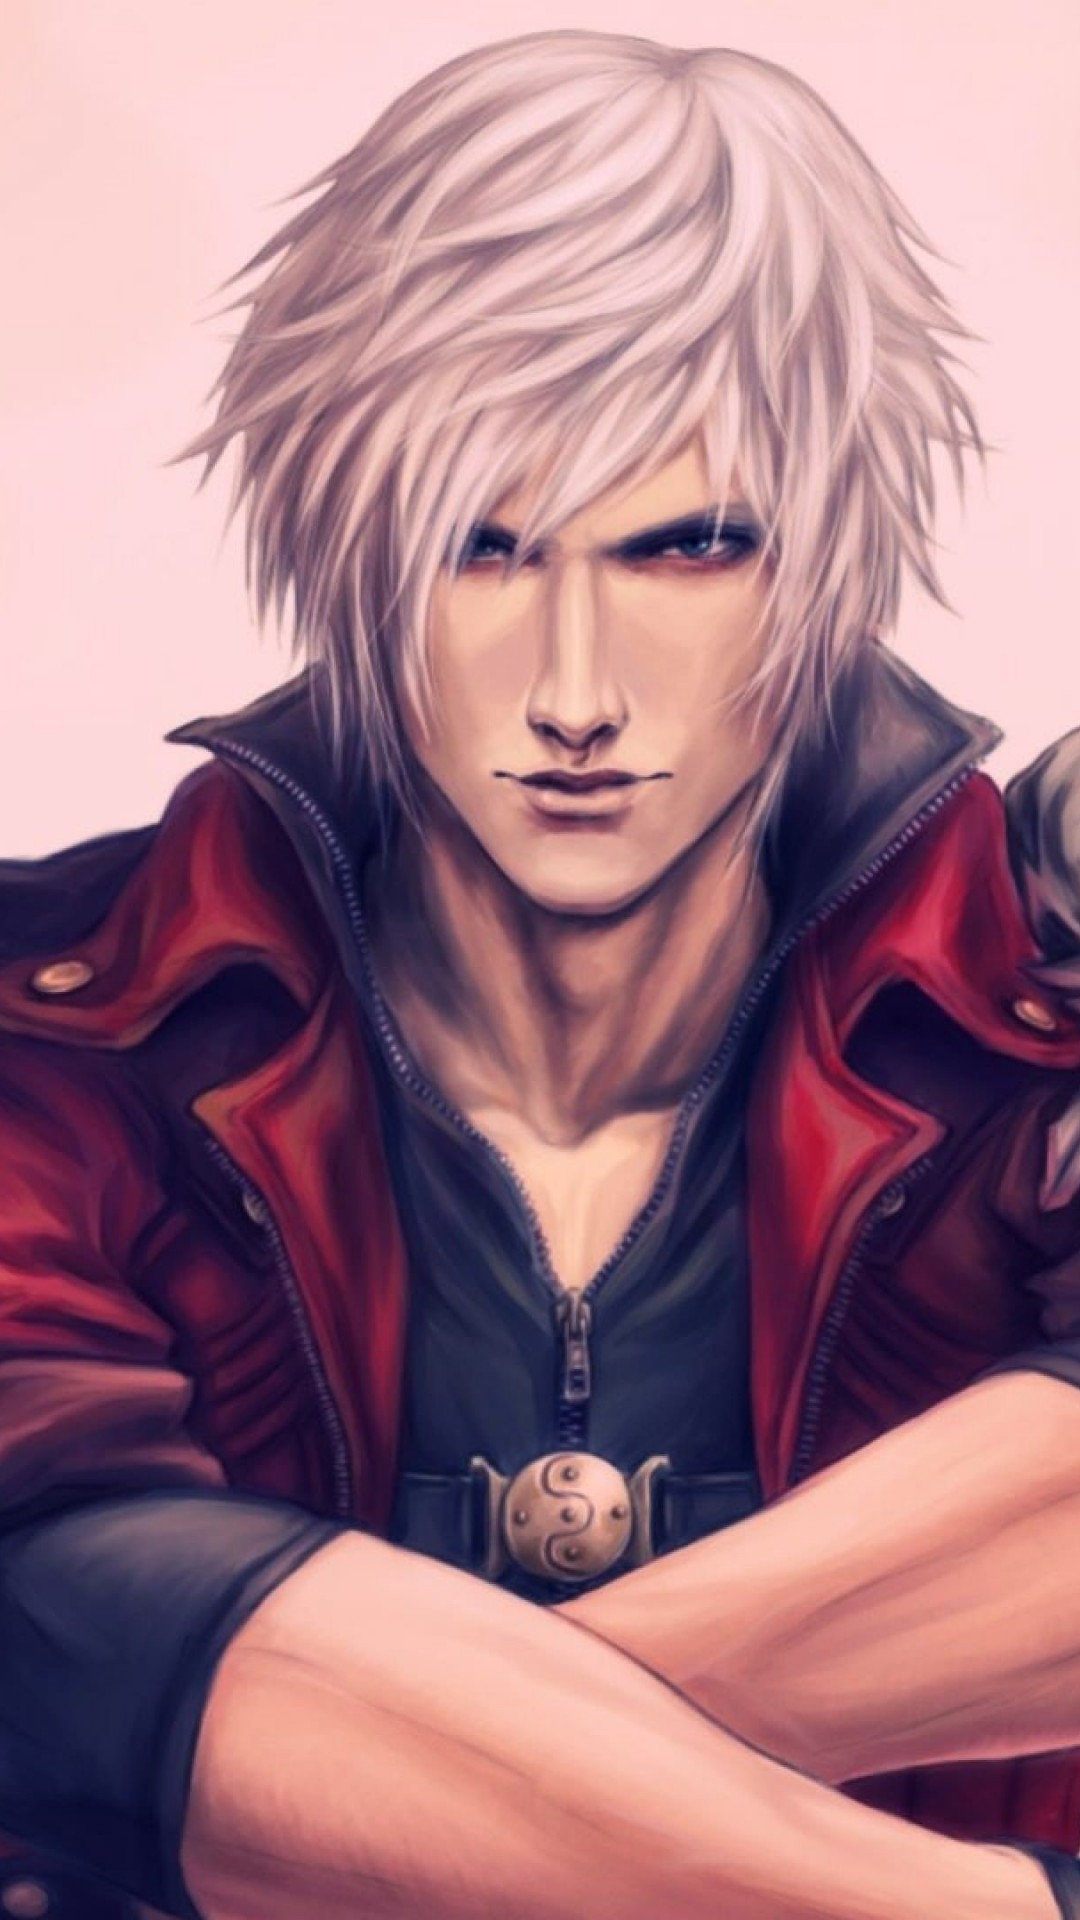 Dante - Devil May Cry Wallpaper for SAMSUNG Galaxy S4